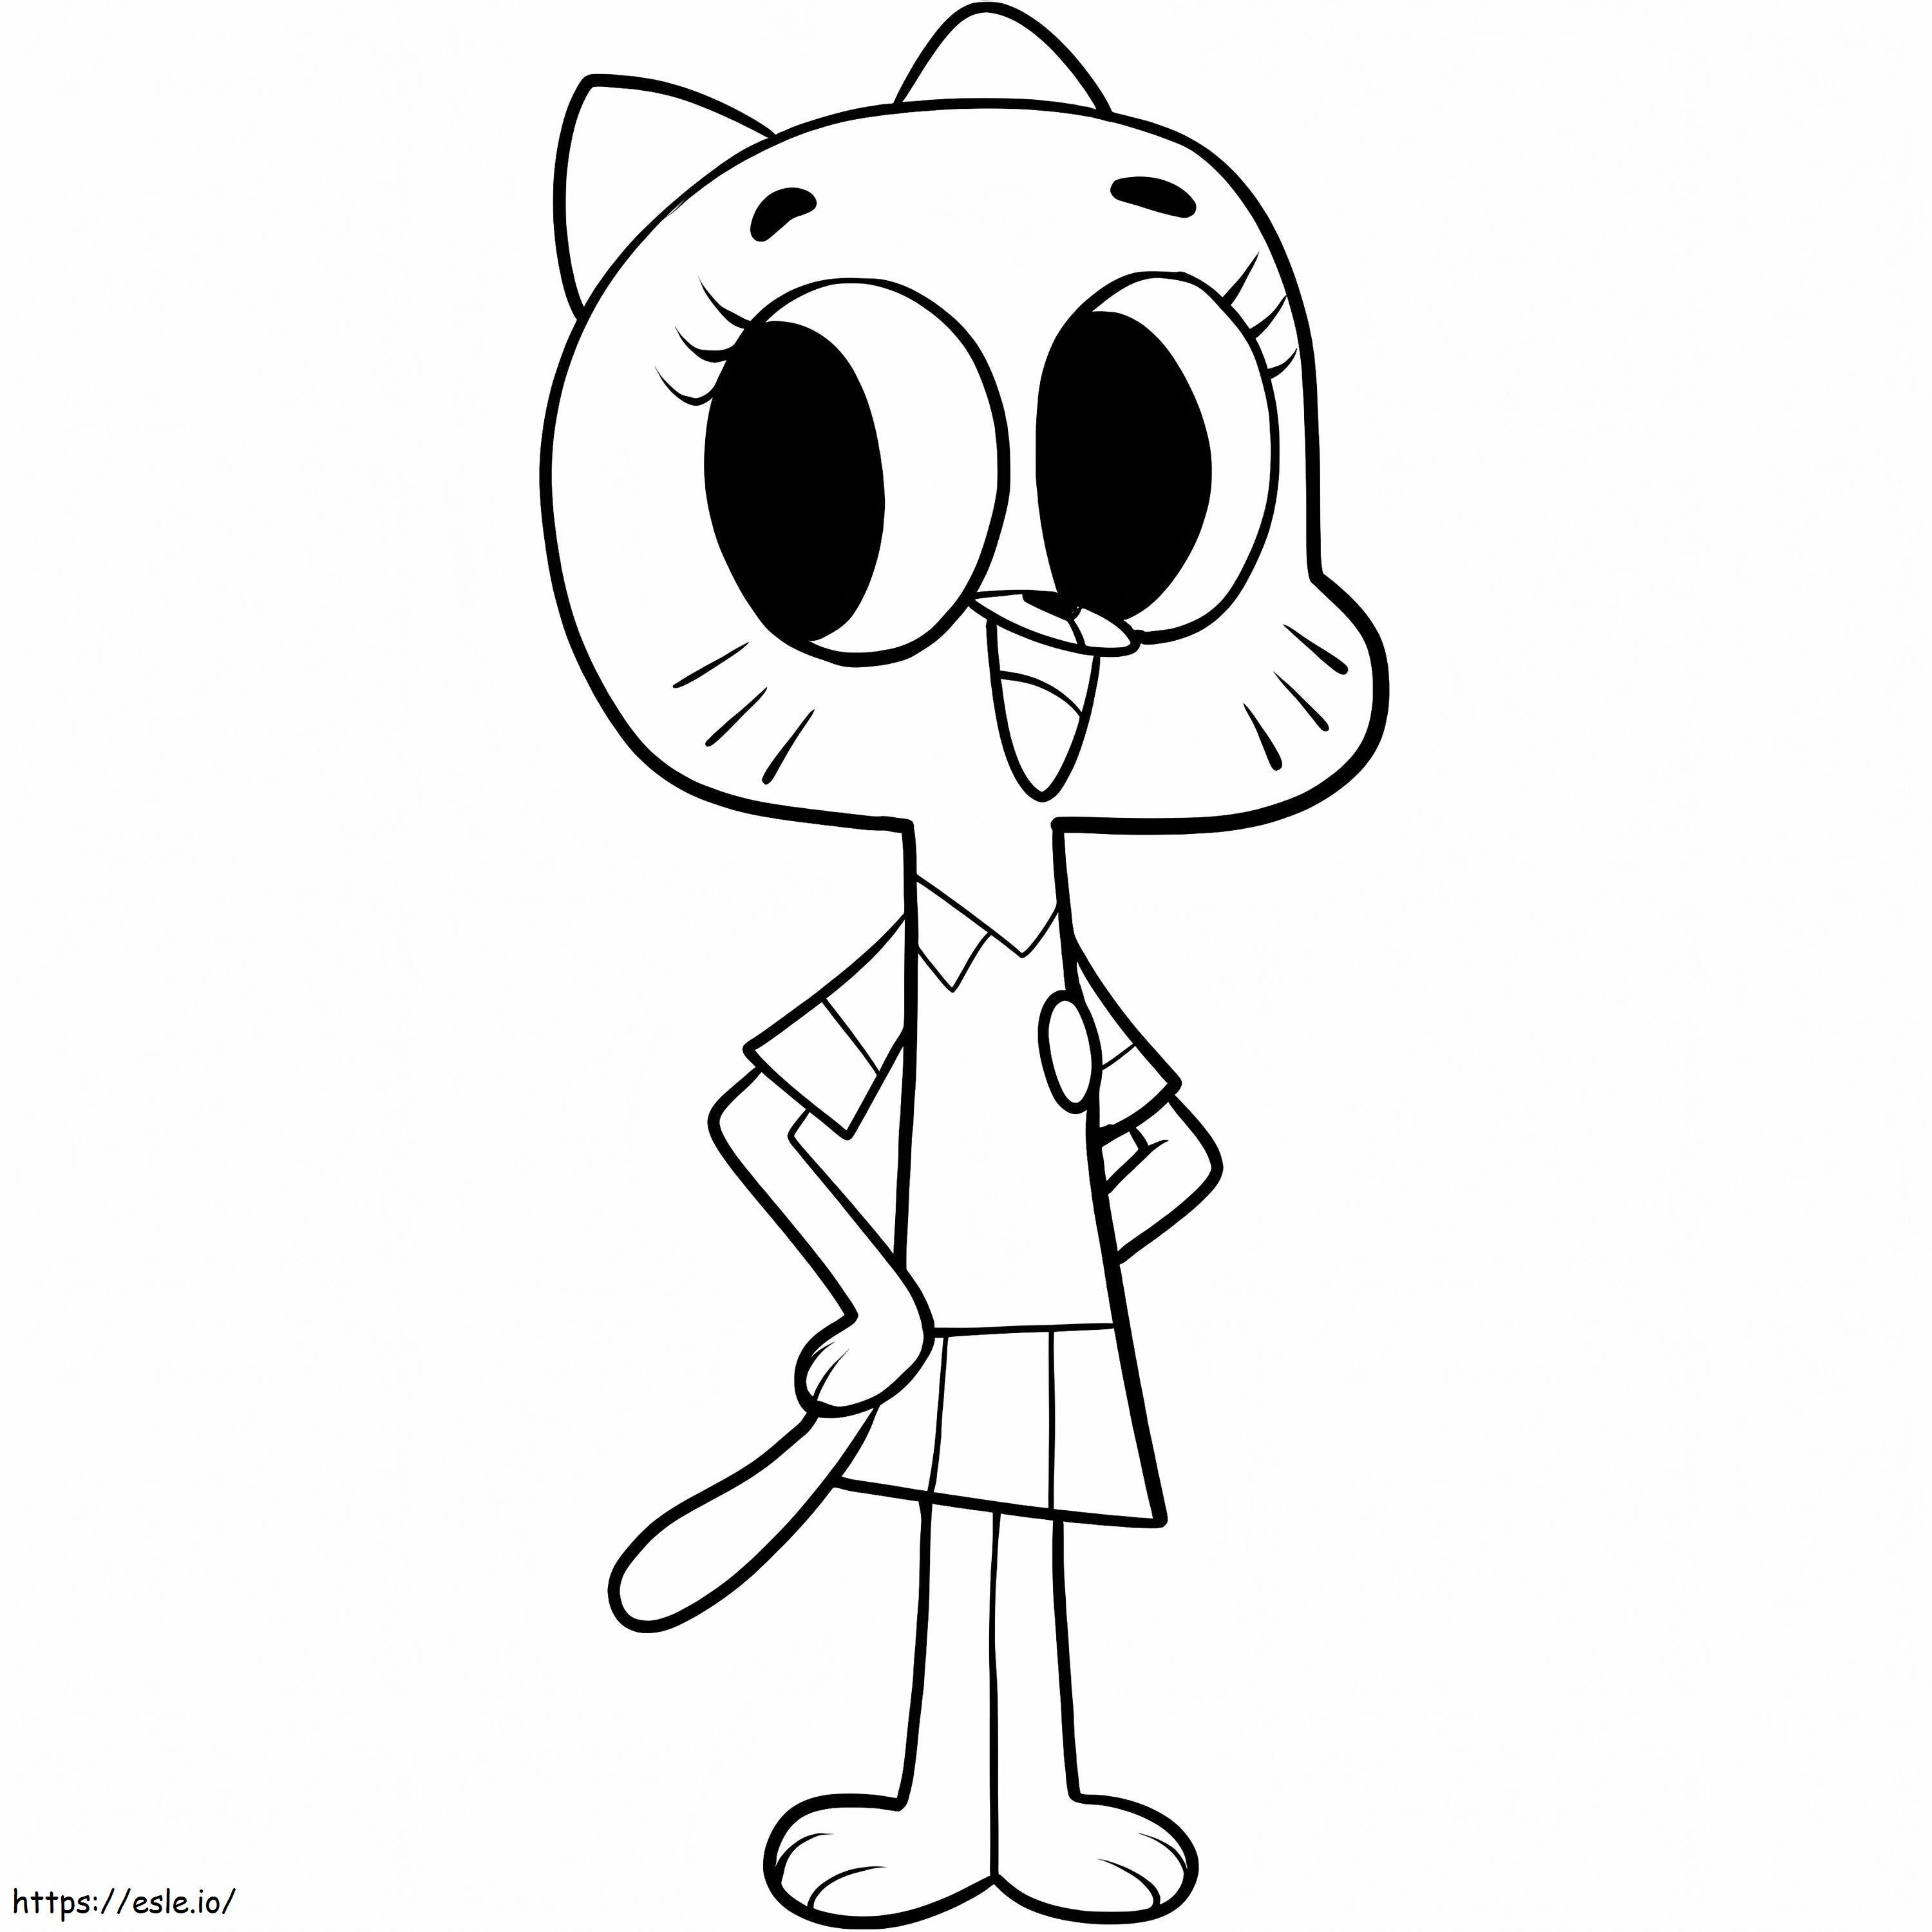 1539940805 Amazing World Of Gumball coloring page